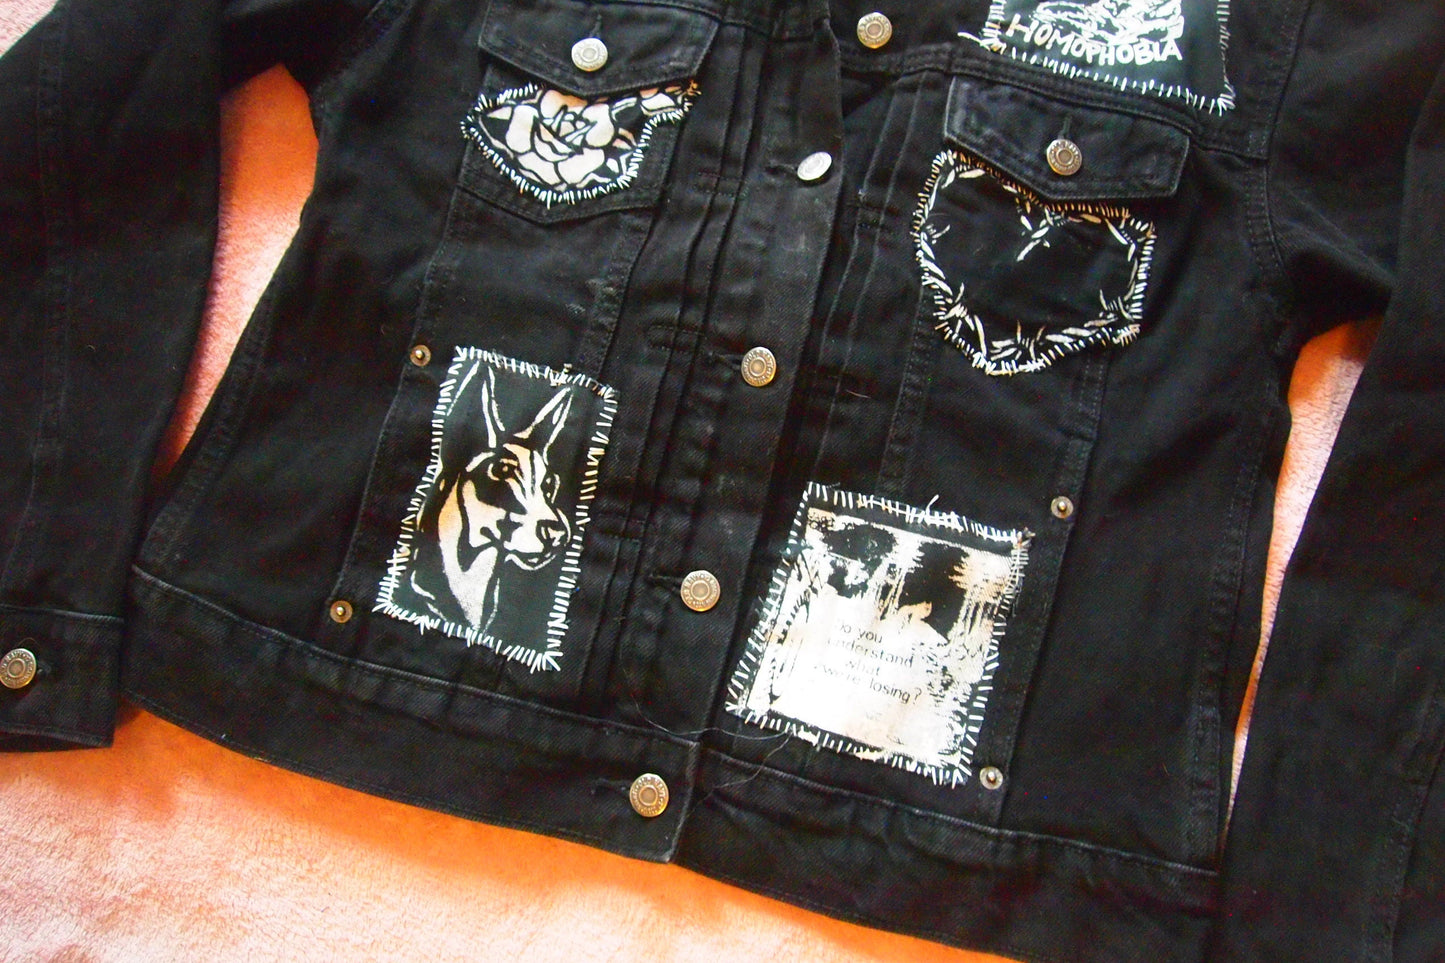 MED Queer Liberation Handmade Custom Studded Black Denim Jacket Patched Queercore Crust Punk 1 of 1 Pride